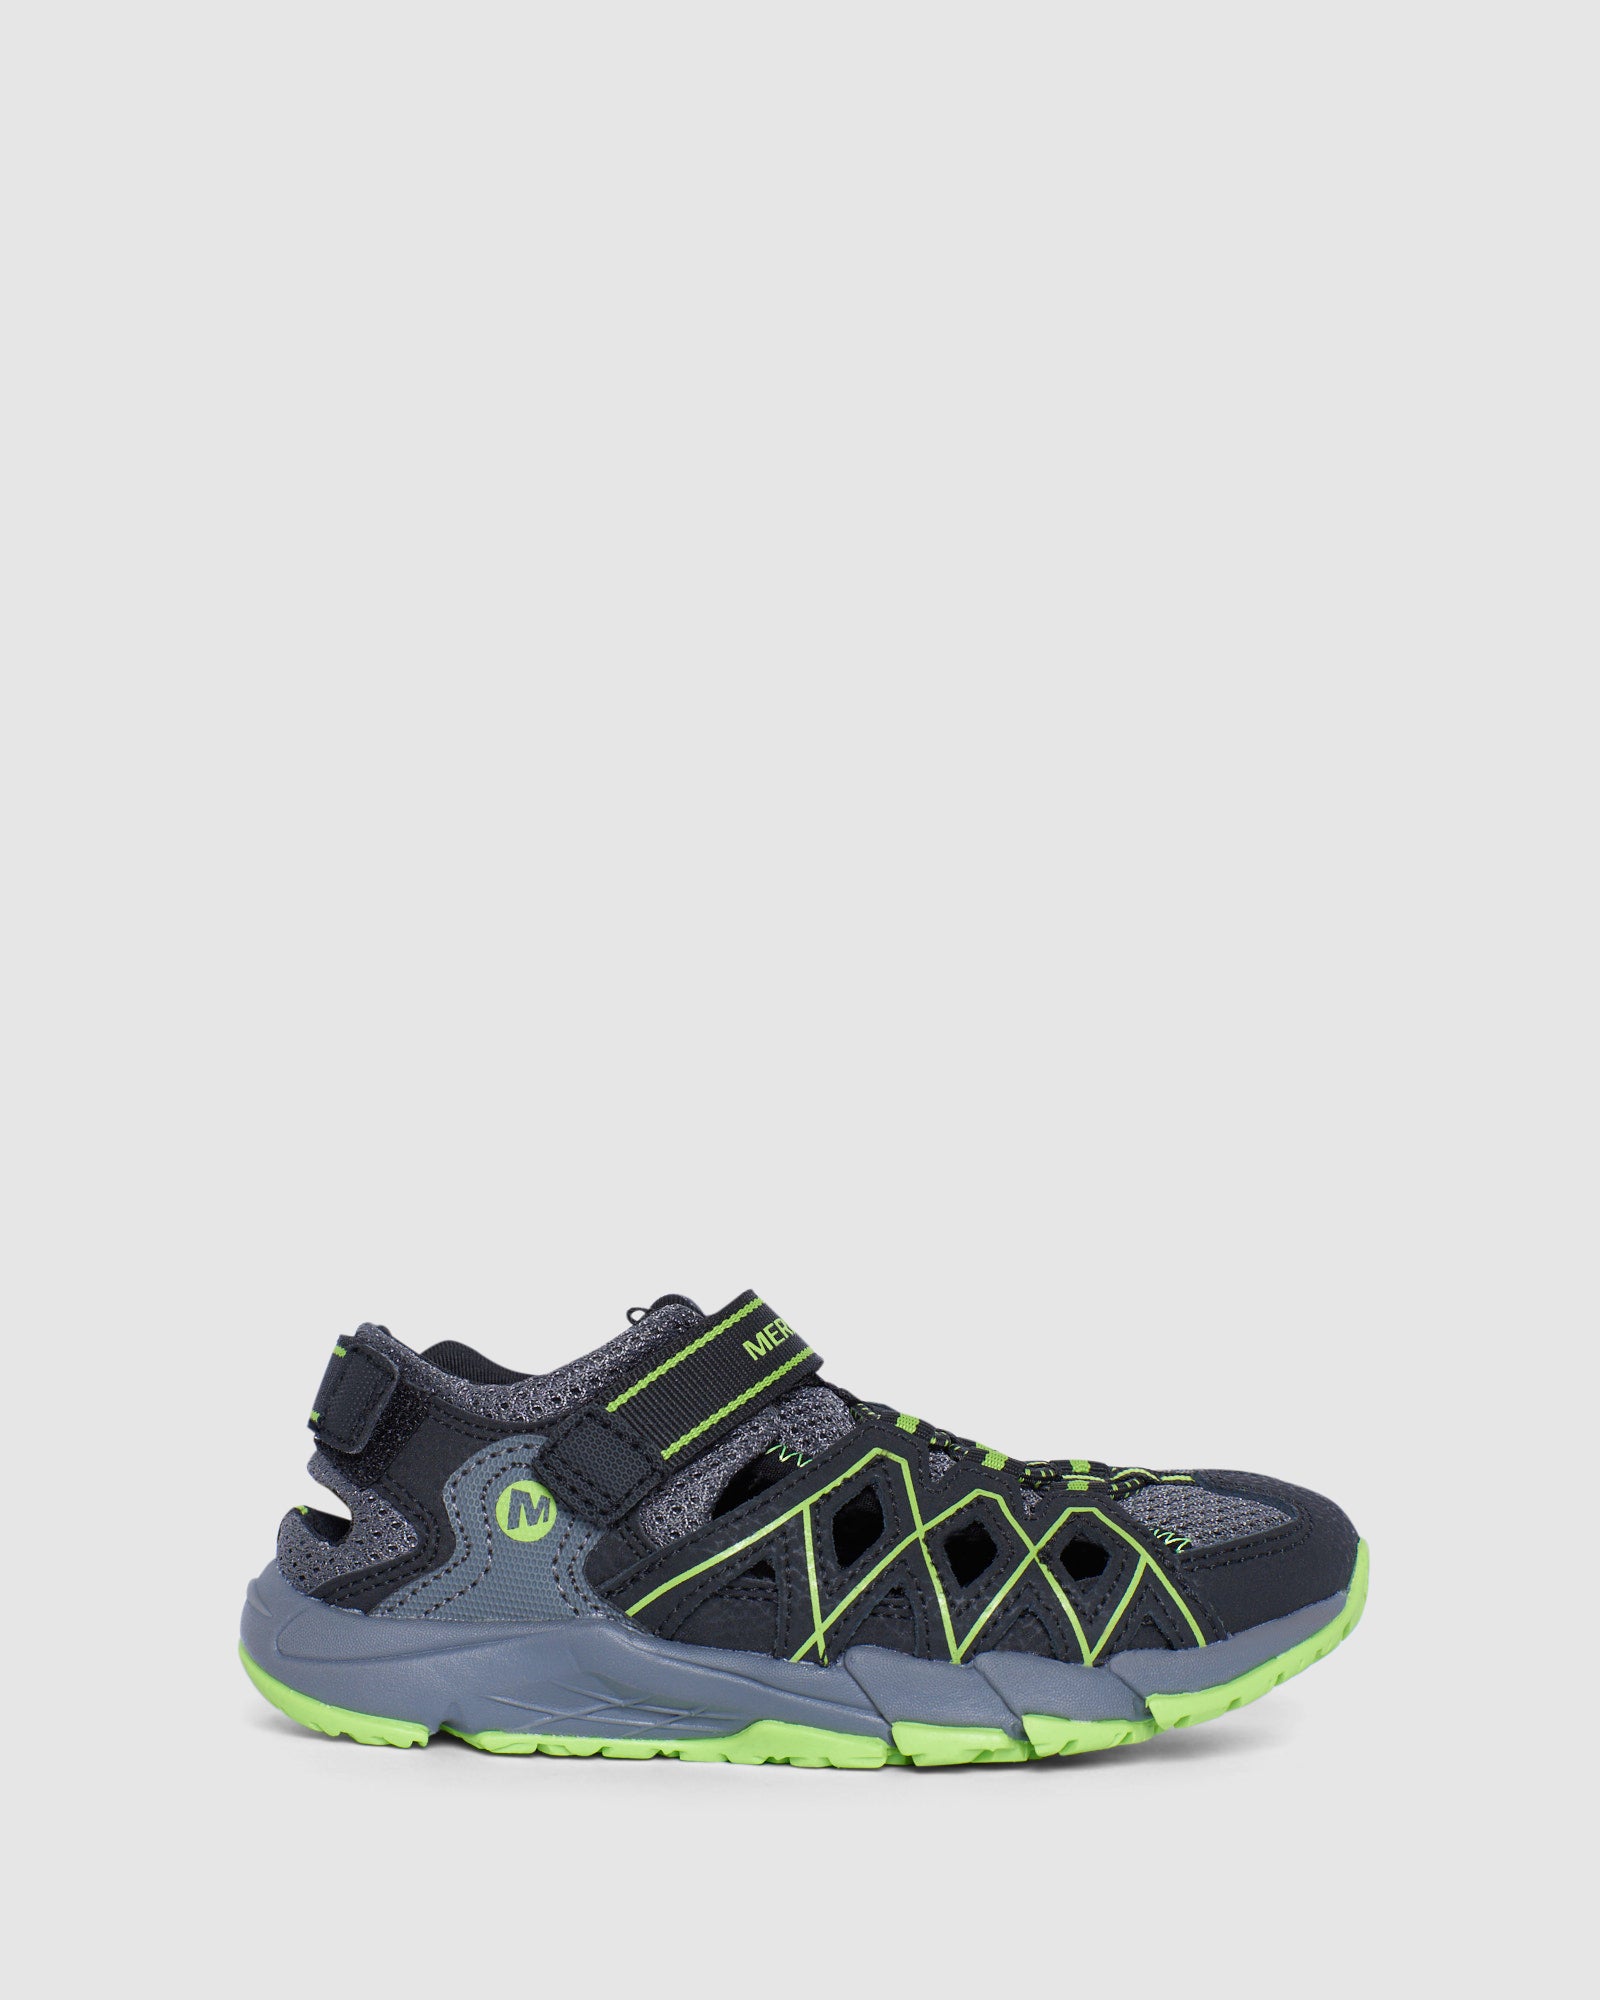 Hydro Quench Hiker Sandal Grey/Black/Lime